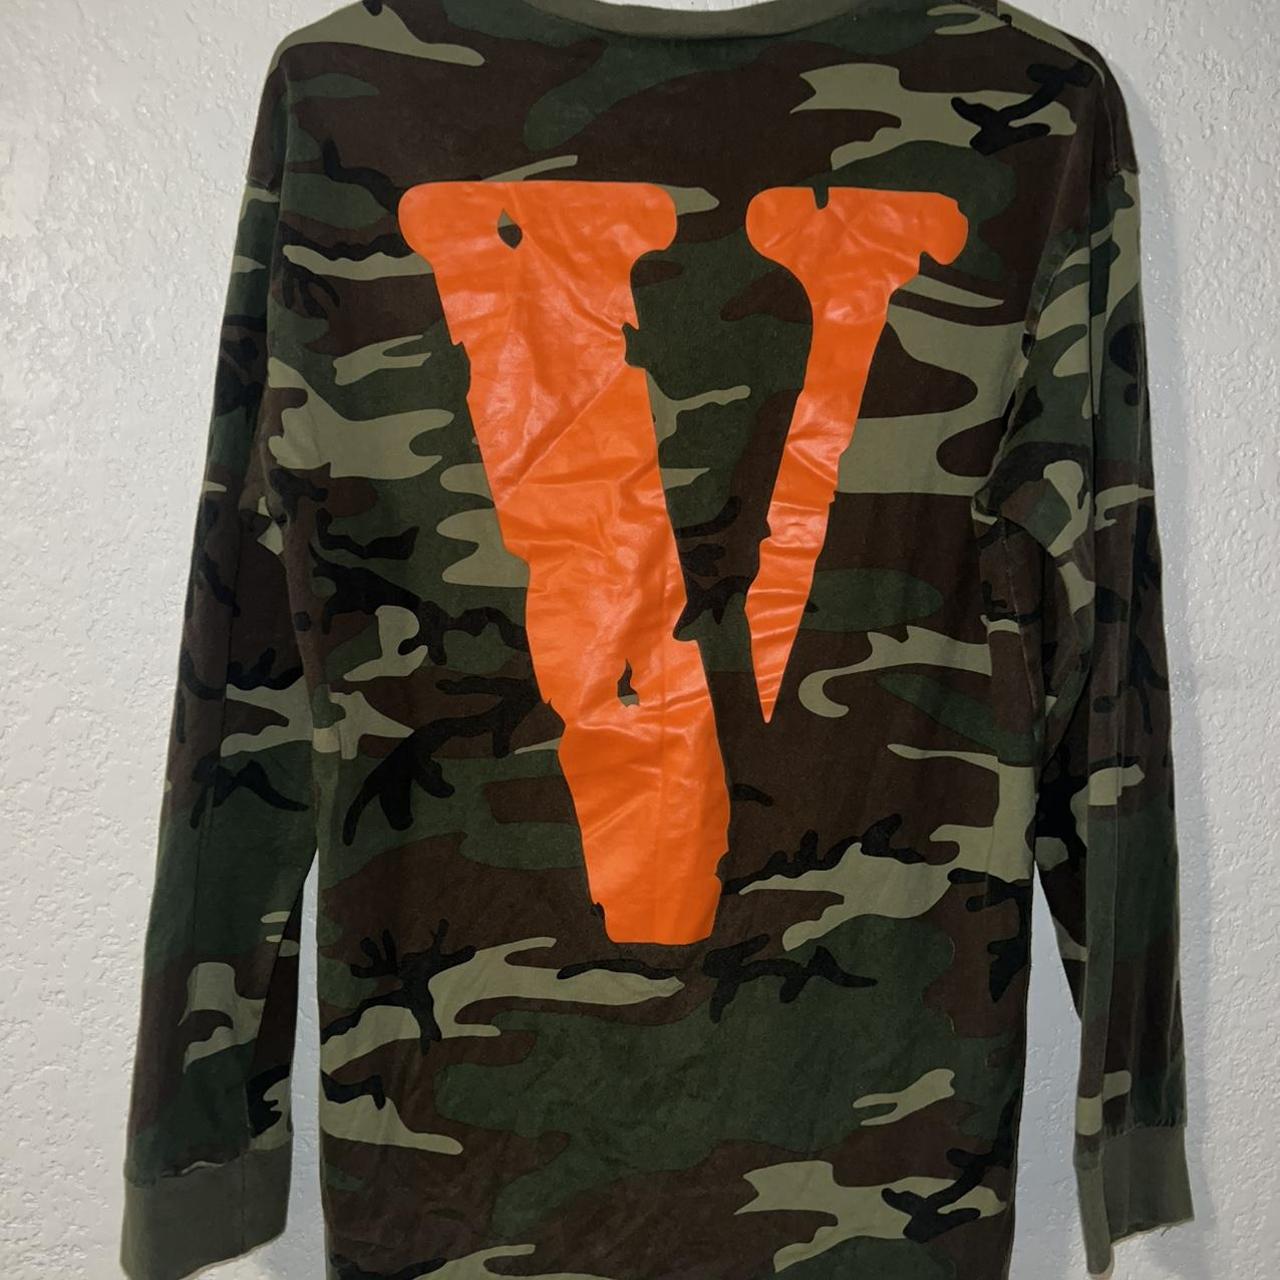 VLone Friends Came long sleeve tee size M #vlone...